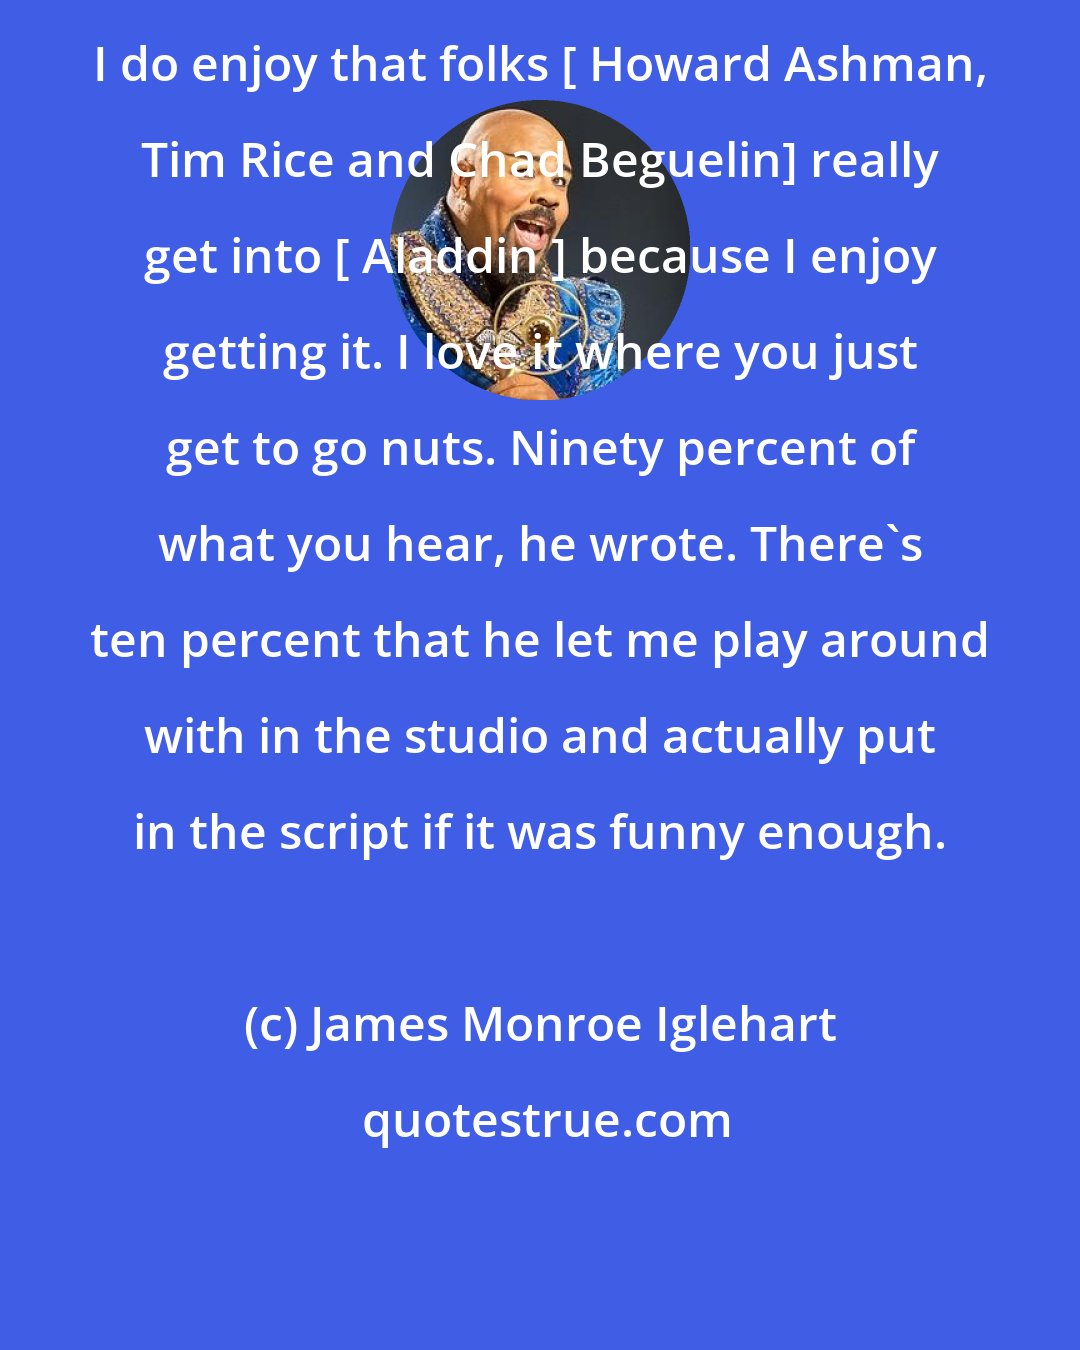 James Monroe Iglehart: I do enjoy that folks [ Howard Ashman, Tim Rice and Chad Beguelin] really get into [ Aladdin ] because I enjoy getting it. I love it where you just get to go nuts. Ninety percent of what you hear, he wrote. There's ten percent that he let me play around with in the studio and actually put in the script if it was funny enough.